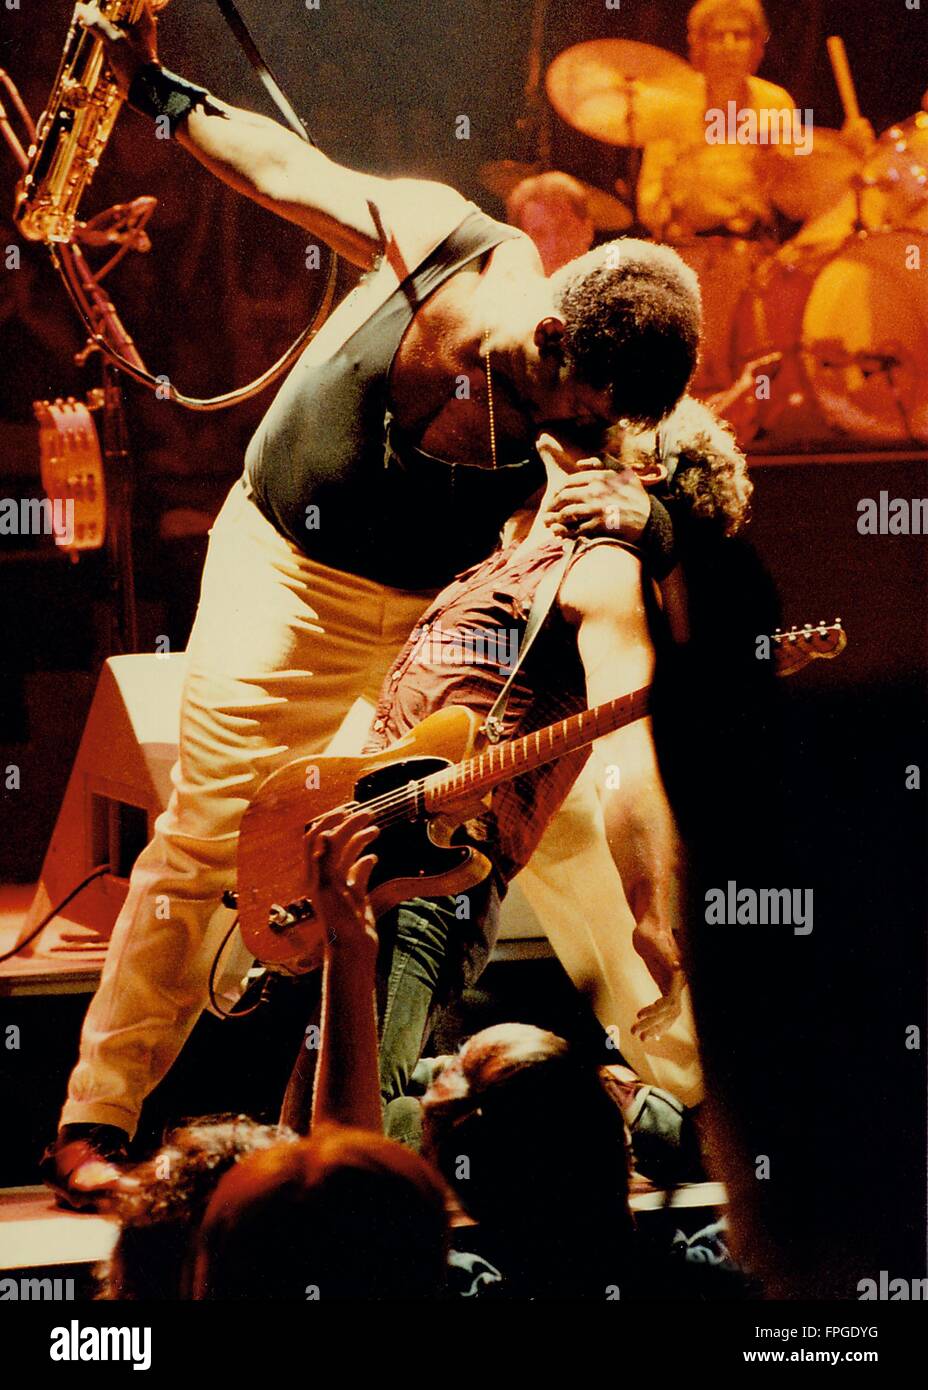 BRUCE SPRINGSTEEN, Clarence Clemons, MEADOWLANDS EAST RUTHERFORD, NJ 08-08-1984 photo Michael Brito Banque D'Images